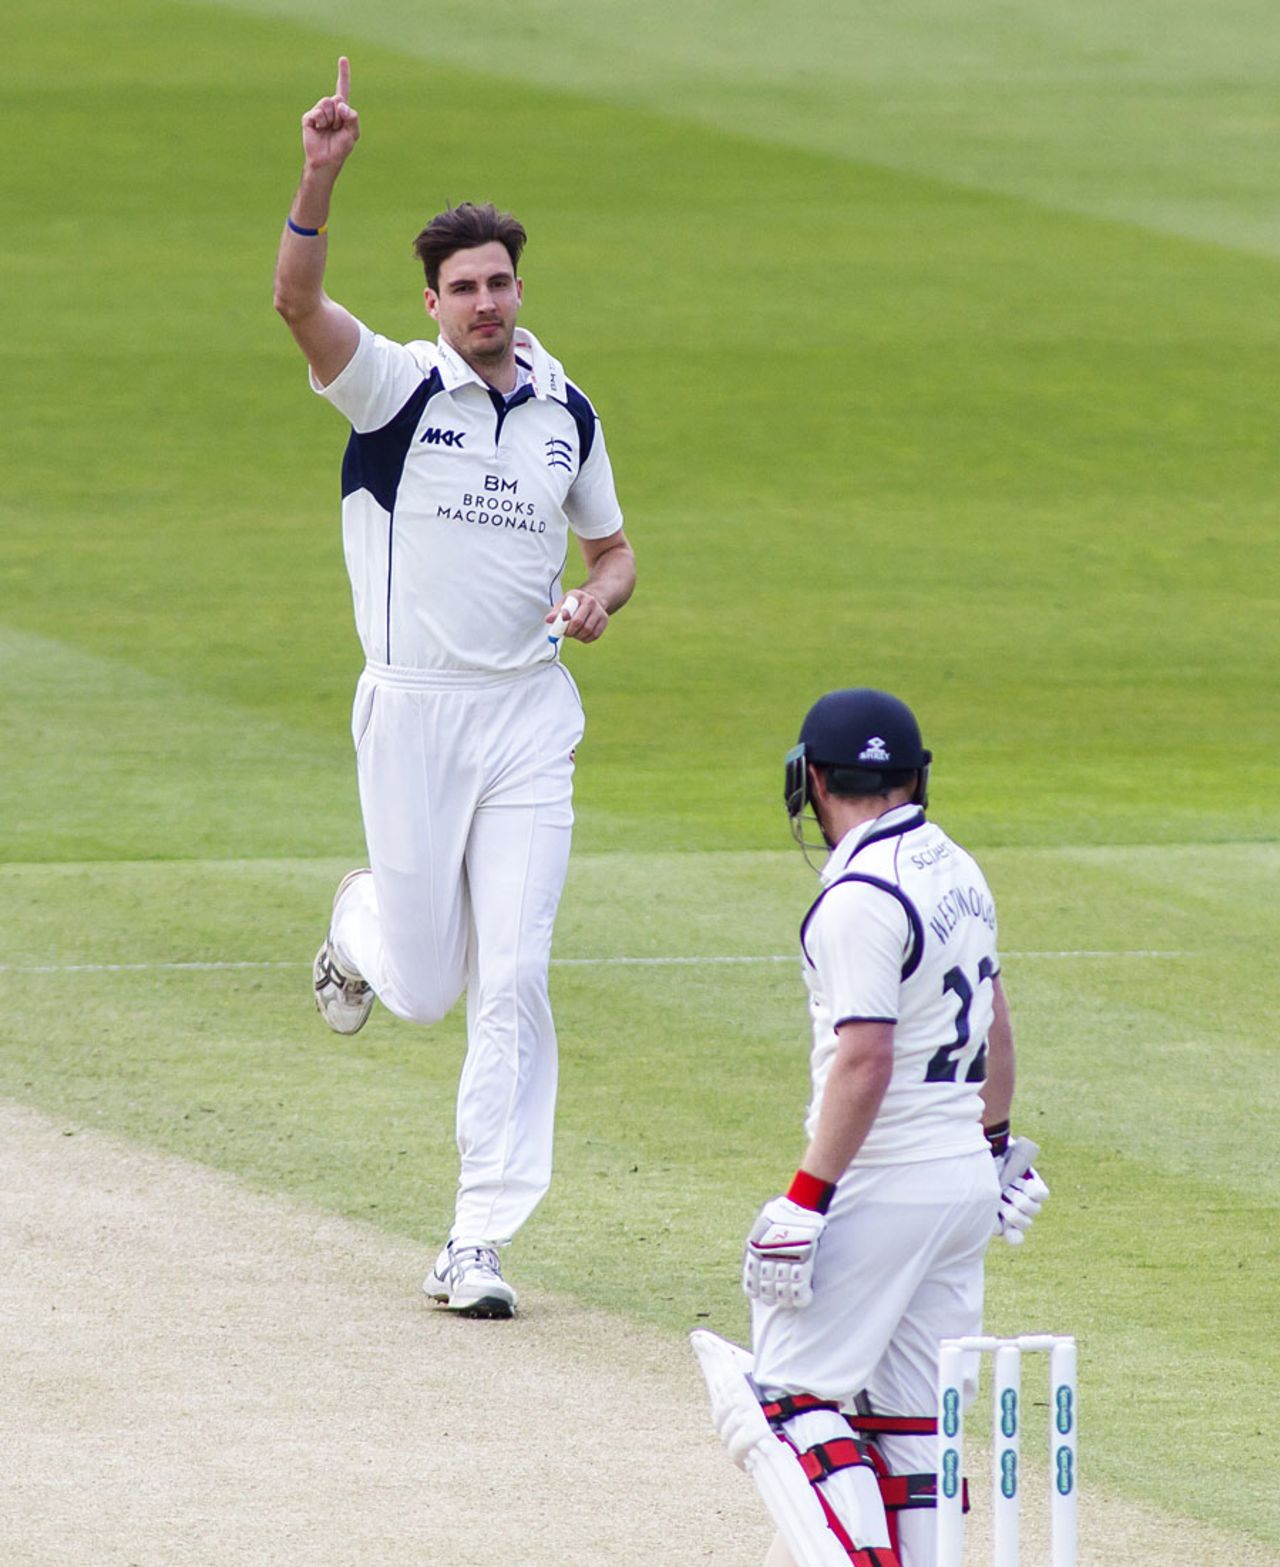 Steven Finn struck with his first ball of the season, Middlesex v Warwickshire, Specsavers County Championship, Division One, Lord's, 2nd day, April 18, 2016